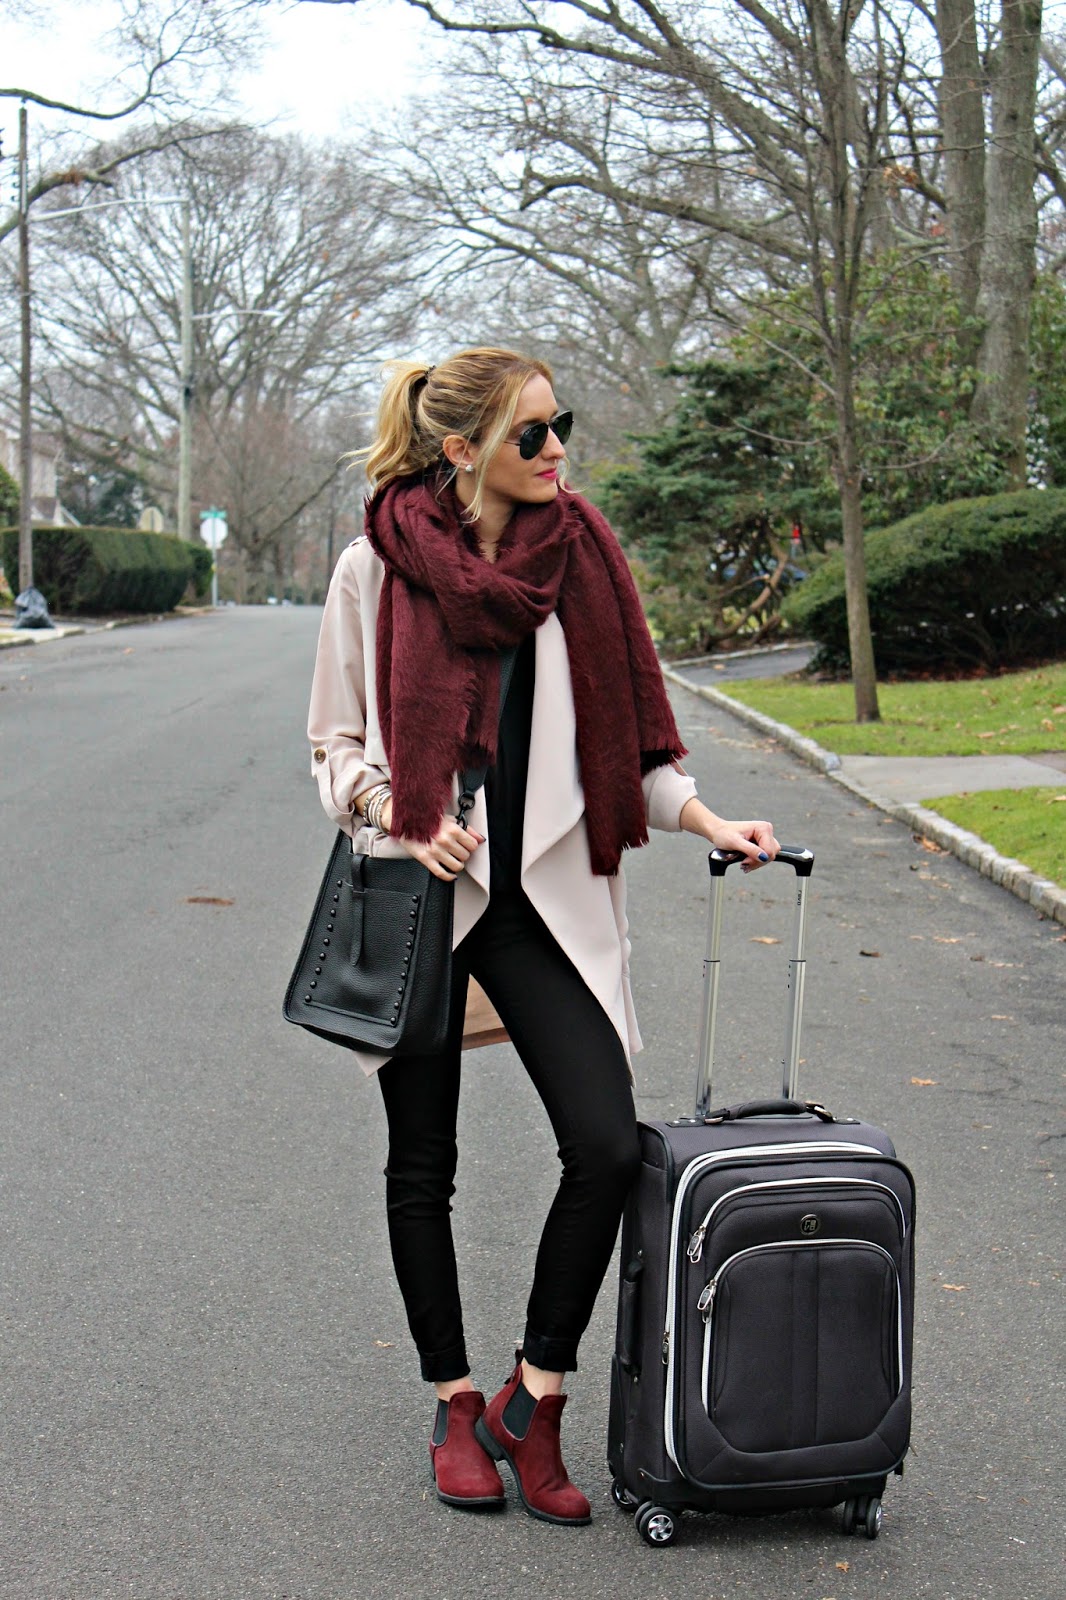 Michelle's Pa(i)ge | Fashion Blogger based in New York: EASY TRAVEL STYLE